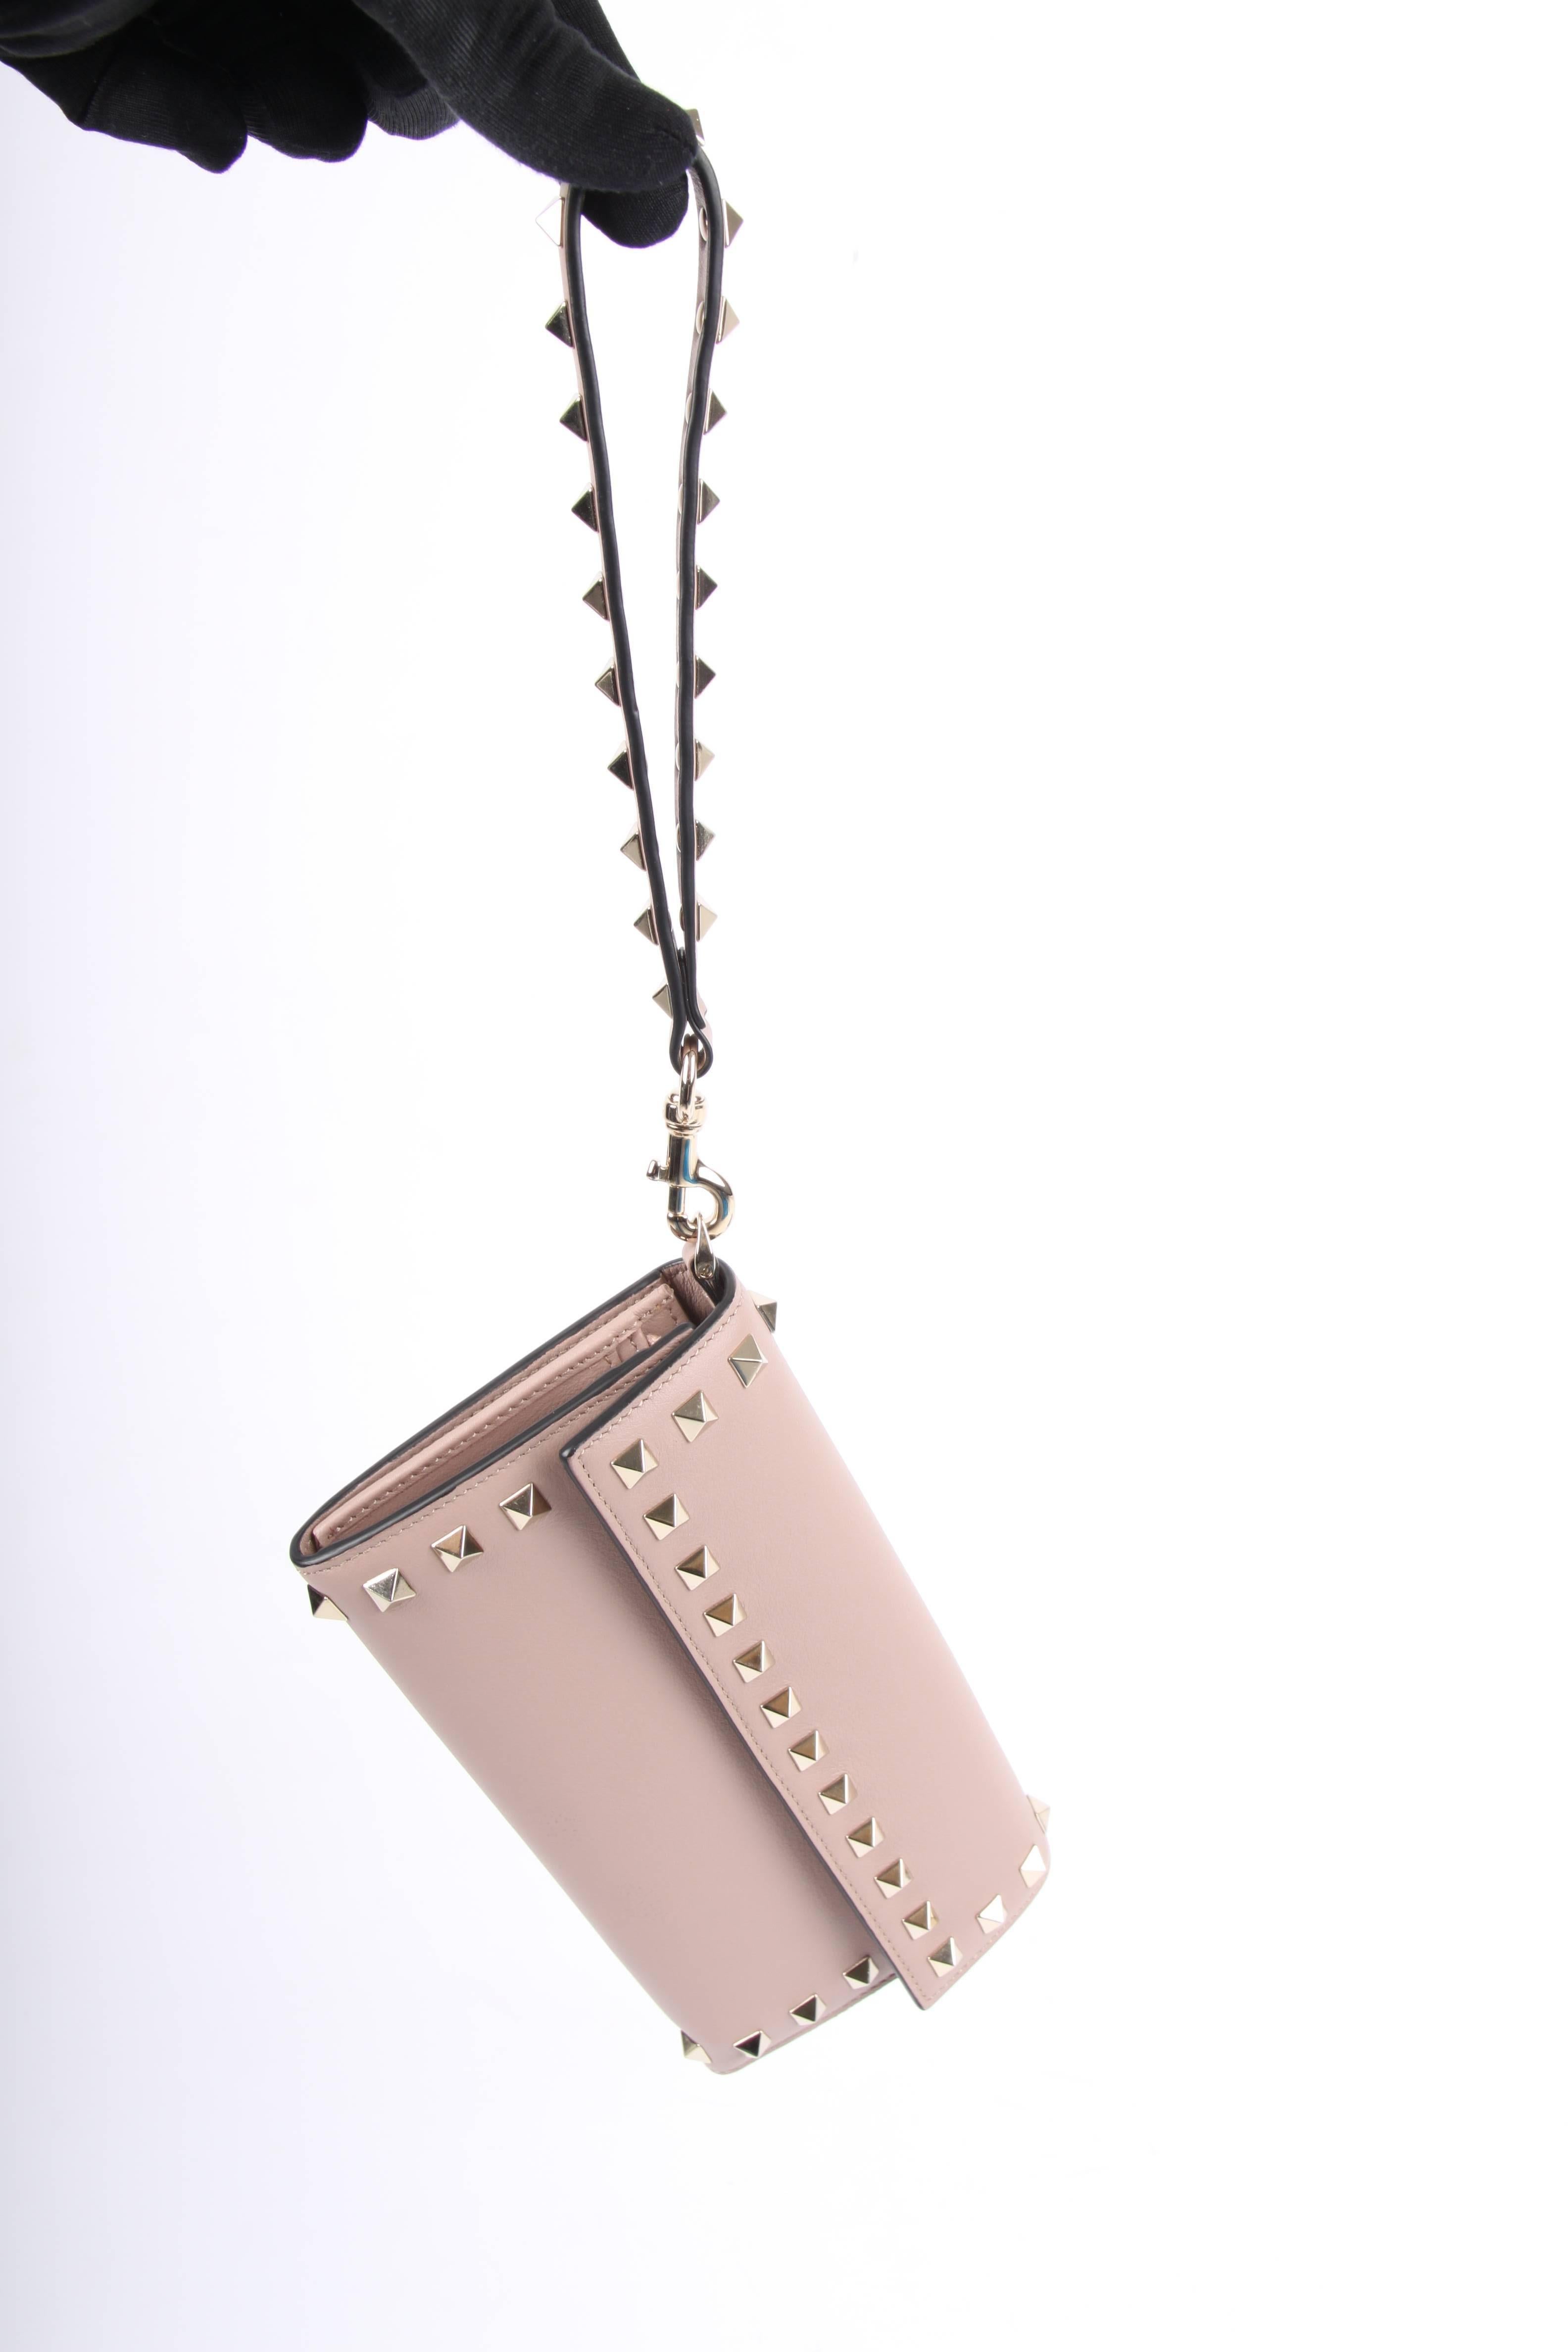 Large wallet by Valentino: this is the Rockstud Wallet. Nice!

Made of leather in a very light shade of taupe with a hint of pink. Of course covered with the welknown square light gold-tone rockstuds. On one side a handy and detachable wrist strap